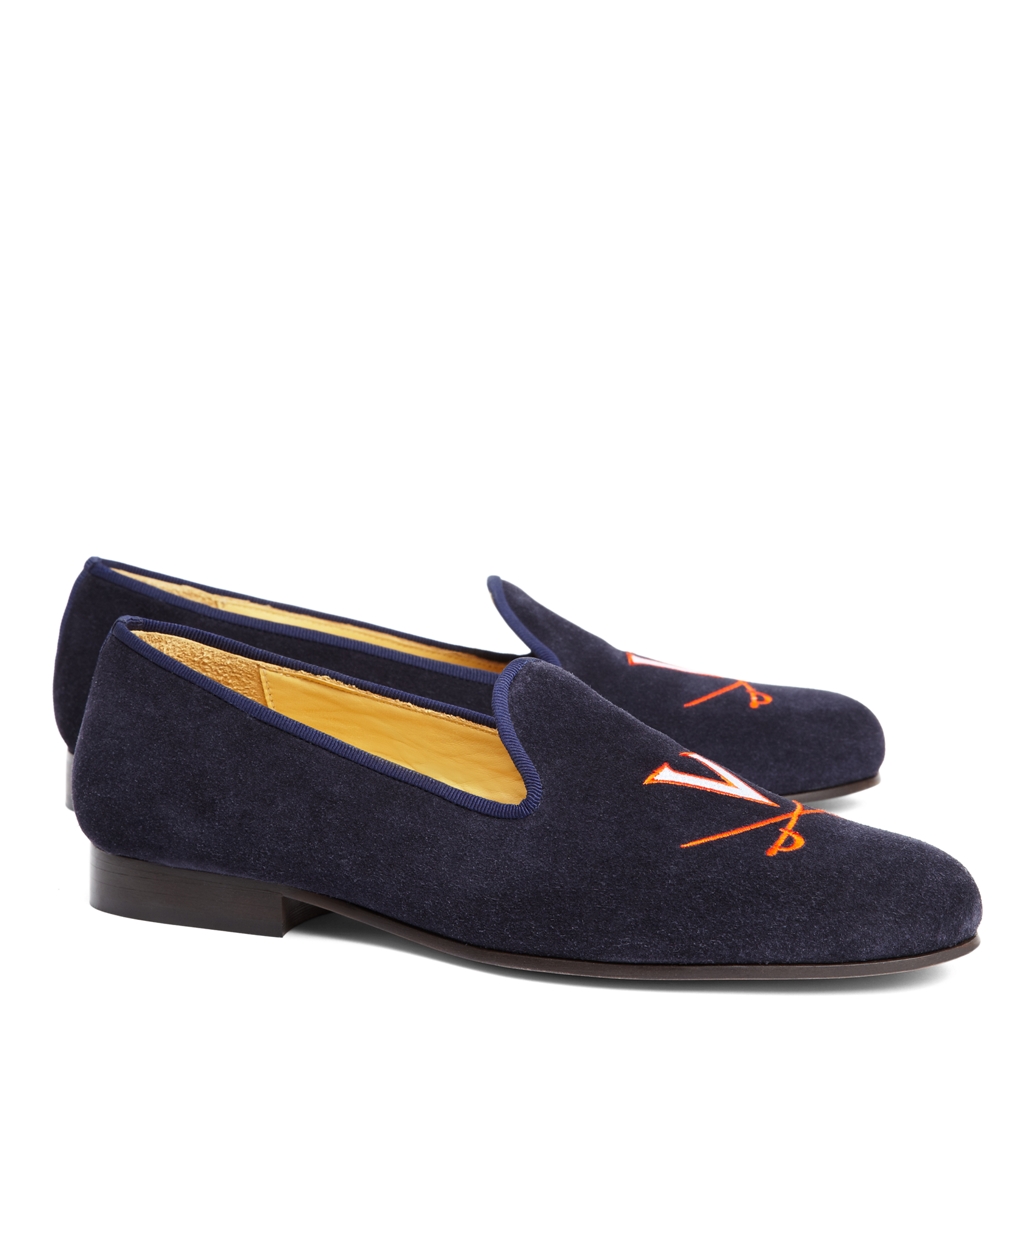 Lyst - Brooks Brothers Jp Crickets University Of Virginia Shoes in Blue ...